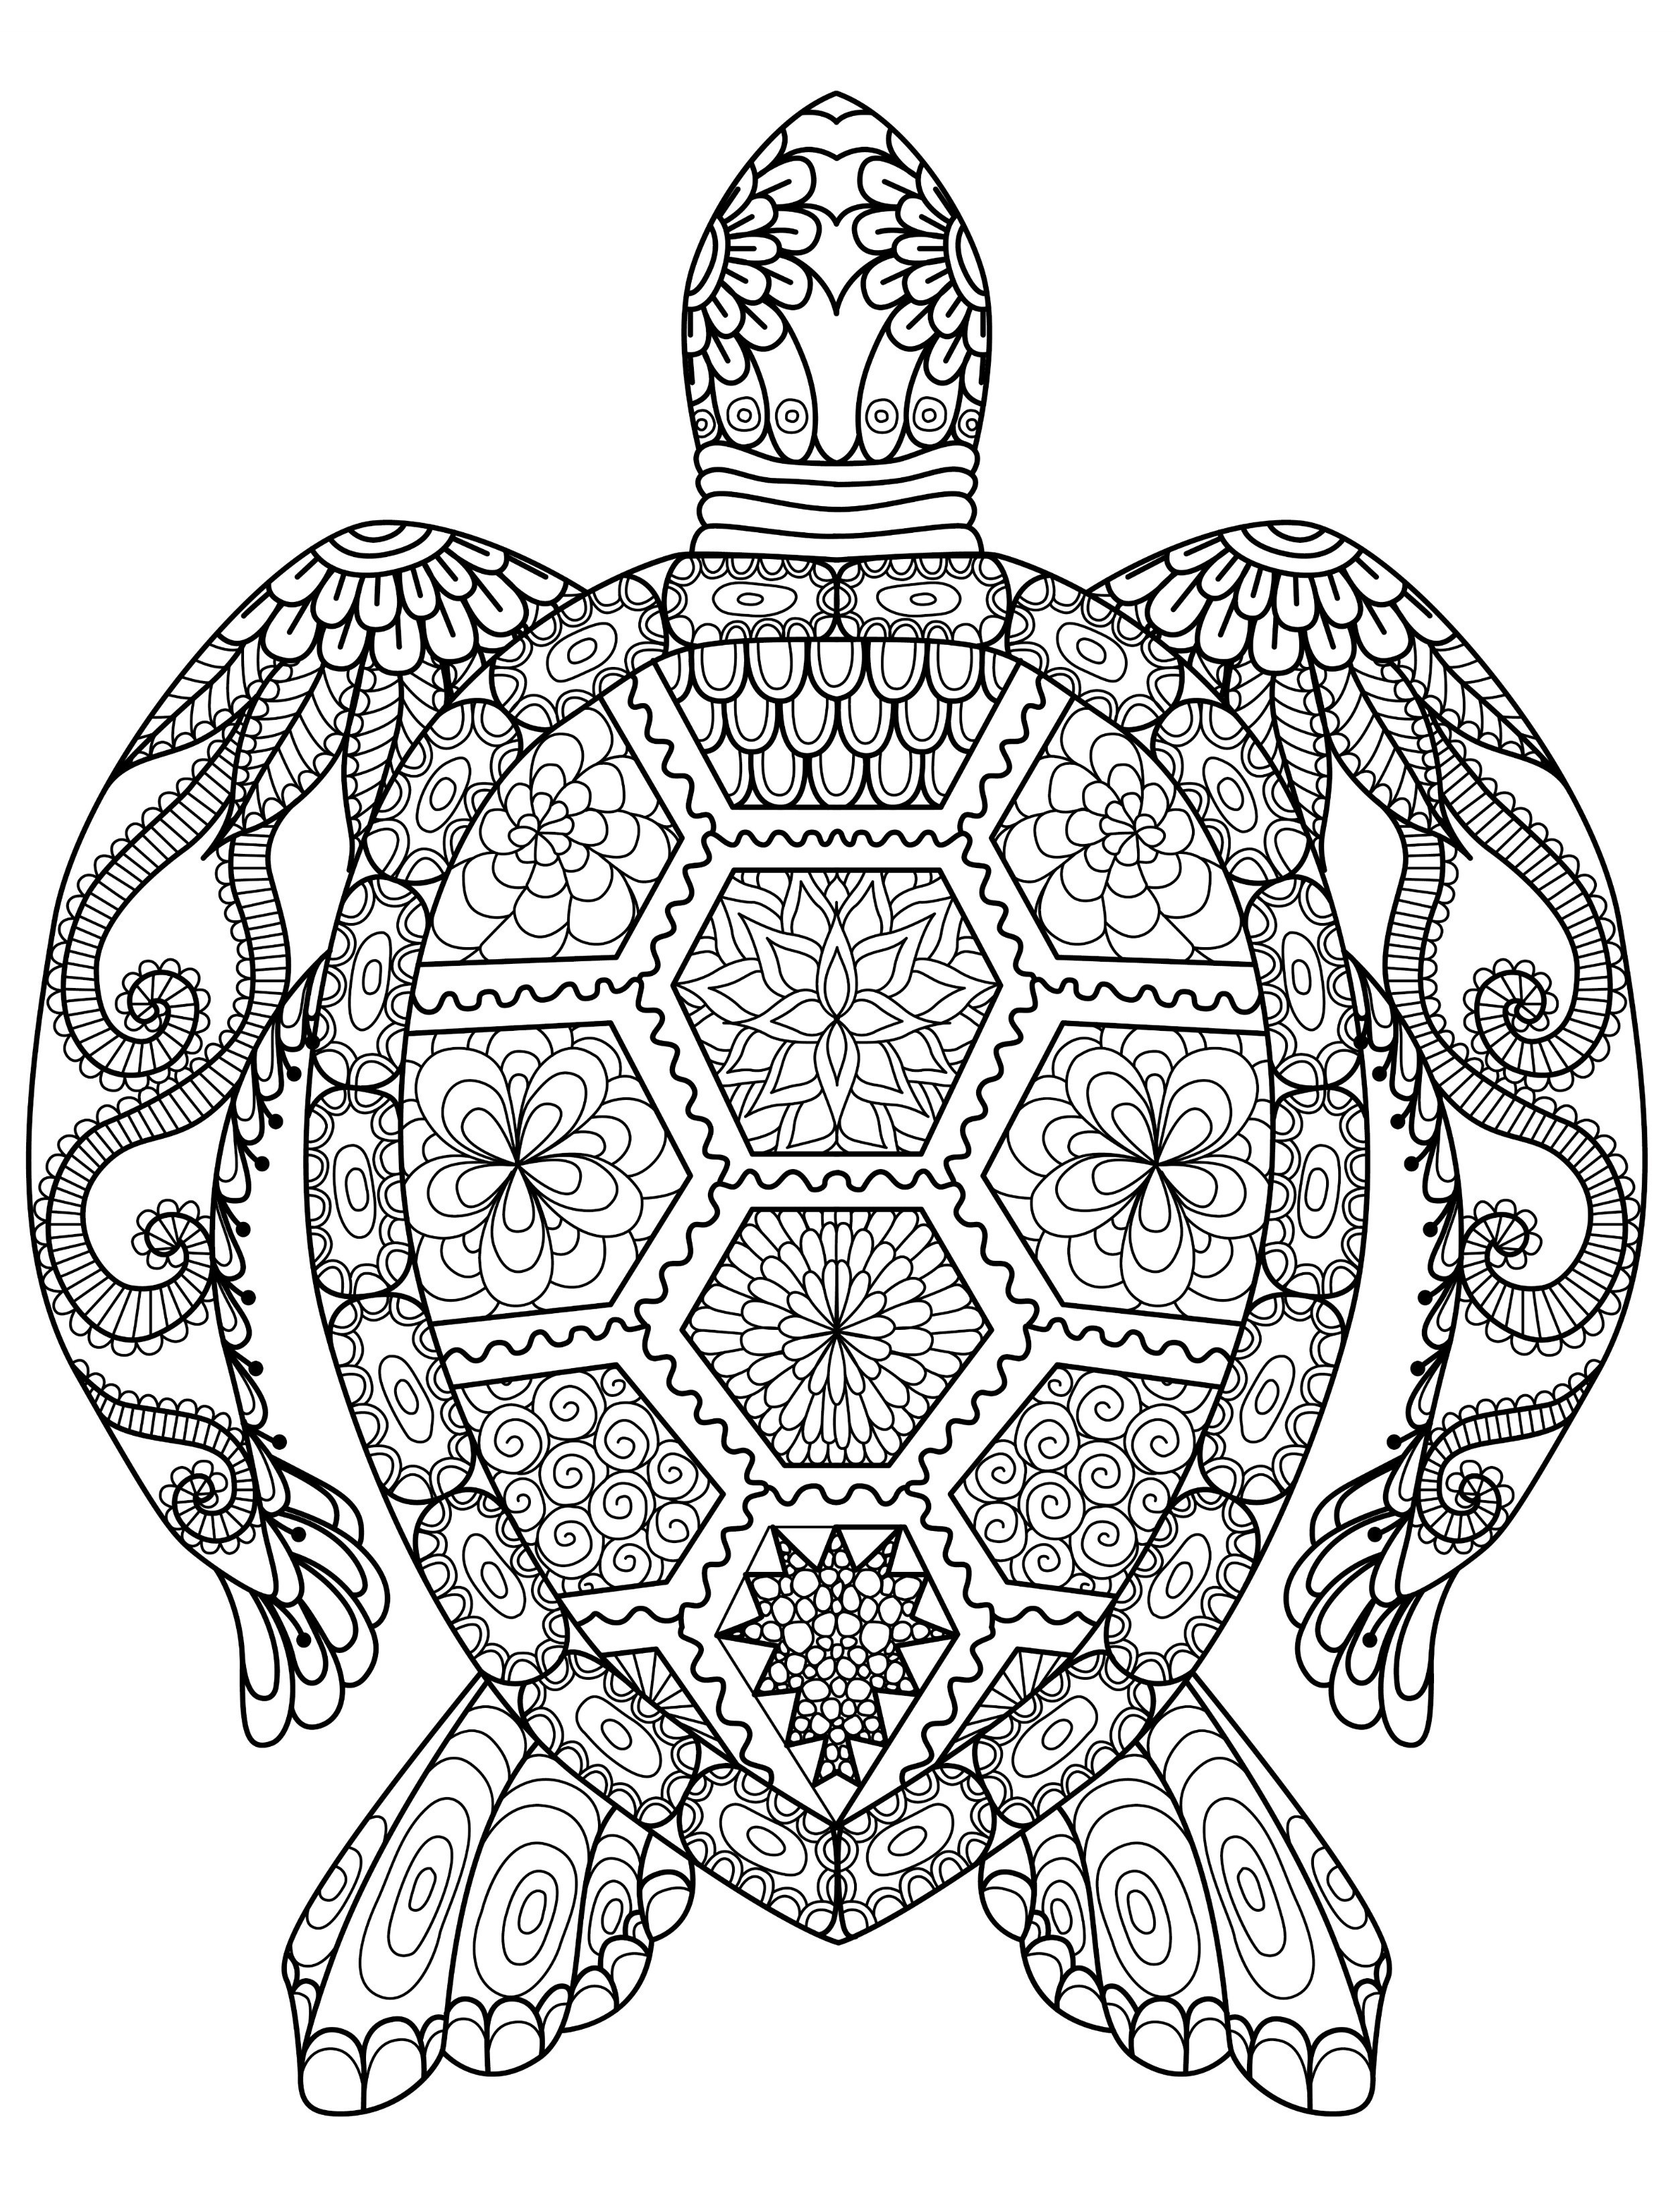 Animals Coloring Pages For Adults
 Adult Coloring Pages Animals Best Coloring Pages For Kids